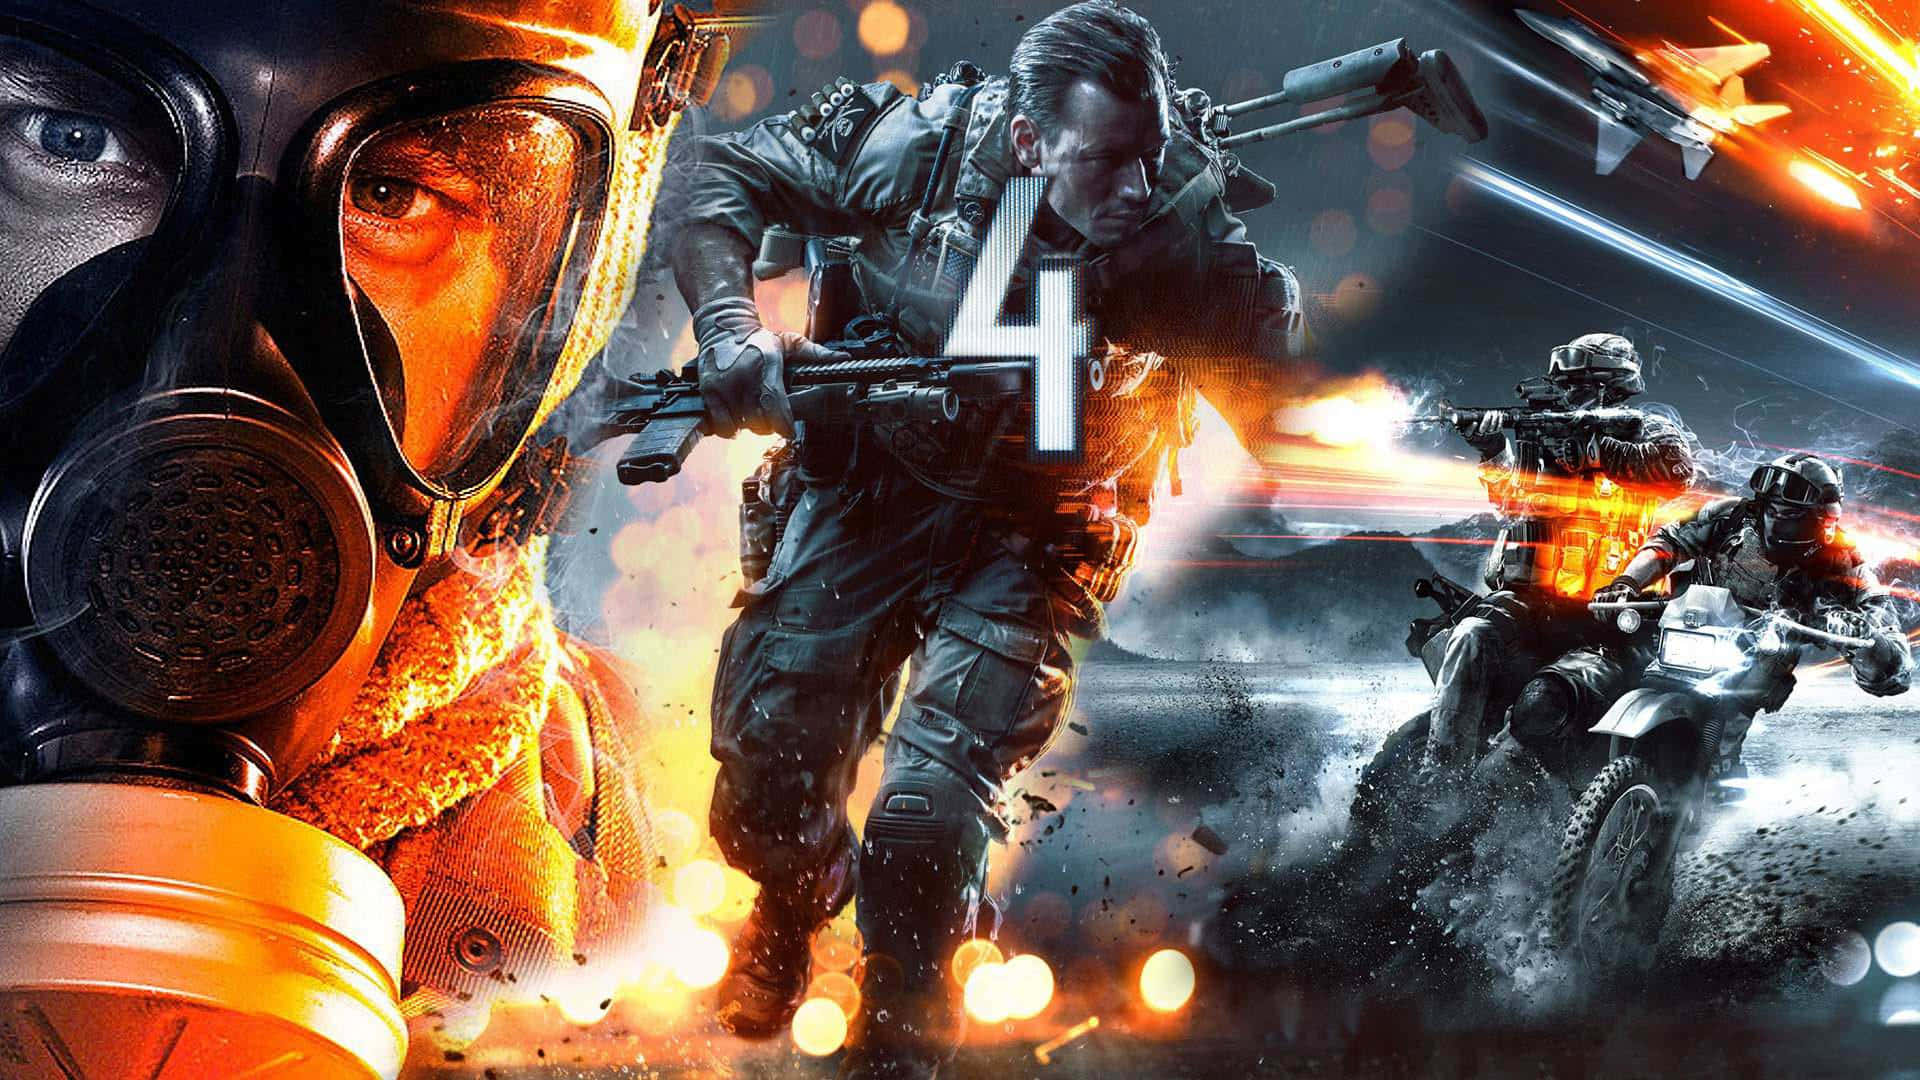 Play Battlefield 4 in brilliant visuals on your 1920x1080 screen